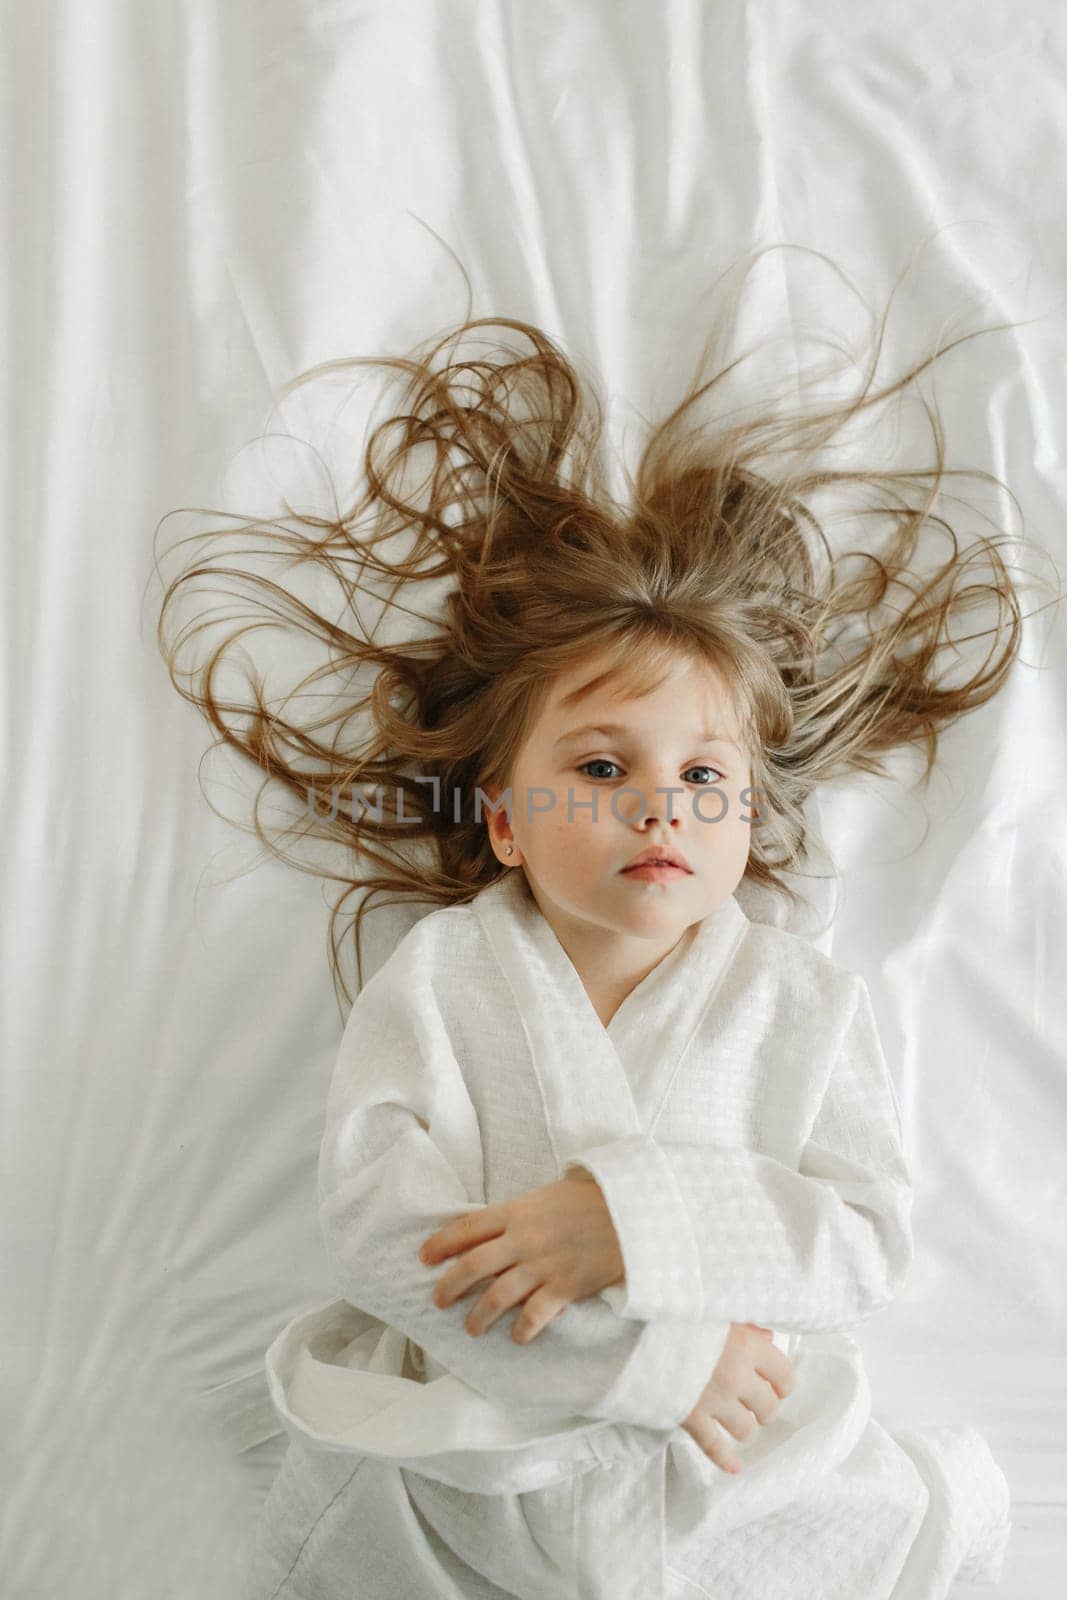 Joyful girl in a white bathrobe lies in bed, looks at the camera. View from above.